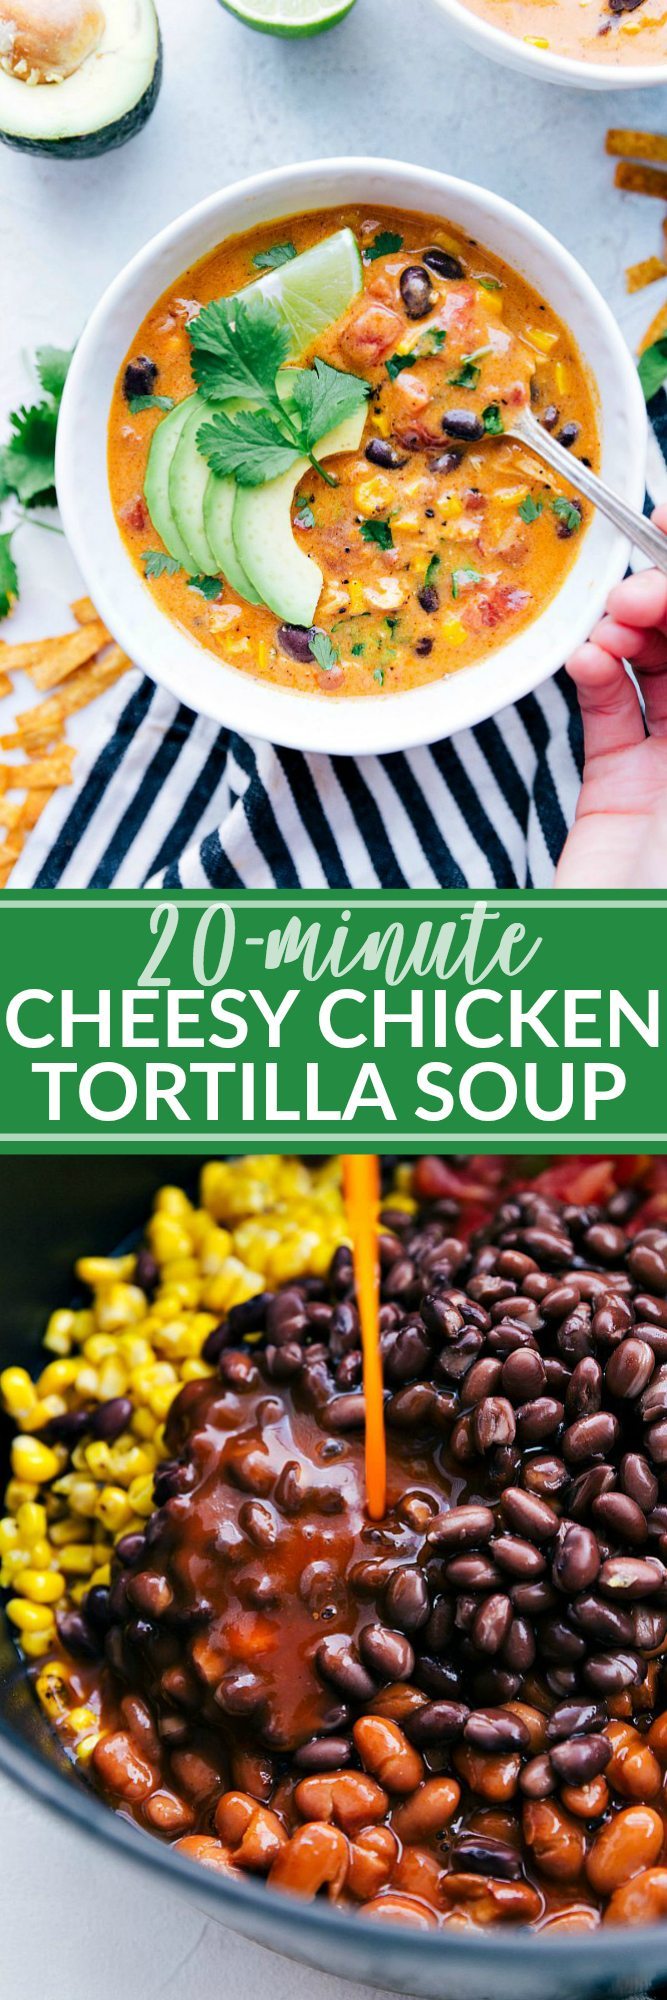 20 MINUTE cheesy and creamy chicken tortilla soup. EVERYONE goes crazy over this simple soup! via chelseasmessyapron.com #comfortfood #soup #chicken #cheesy #tortilla #dinner #lunch #cheesy #creamy #easy #quick #20minute